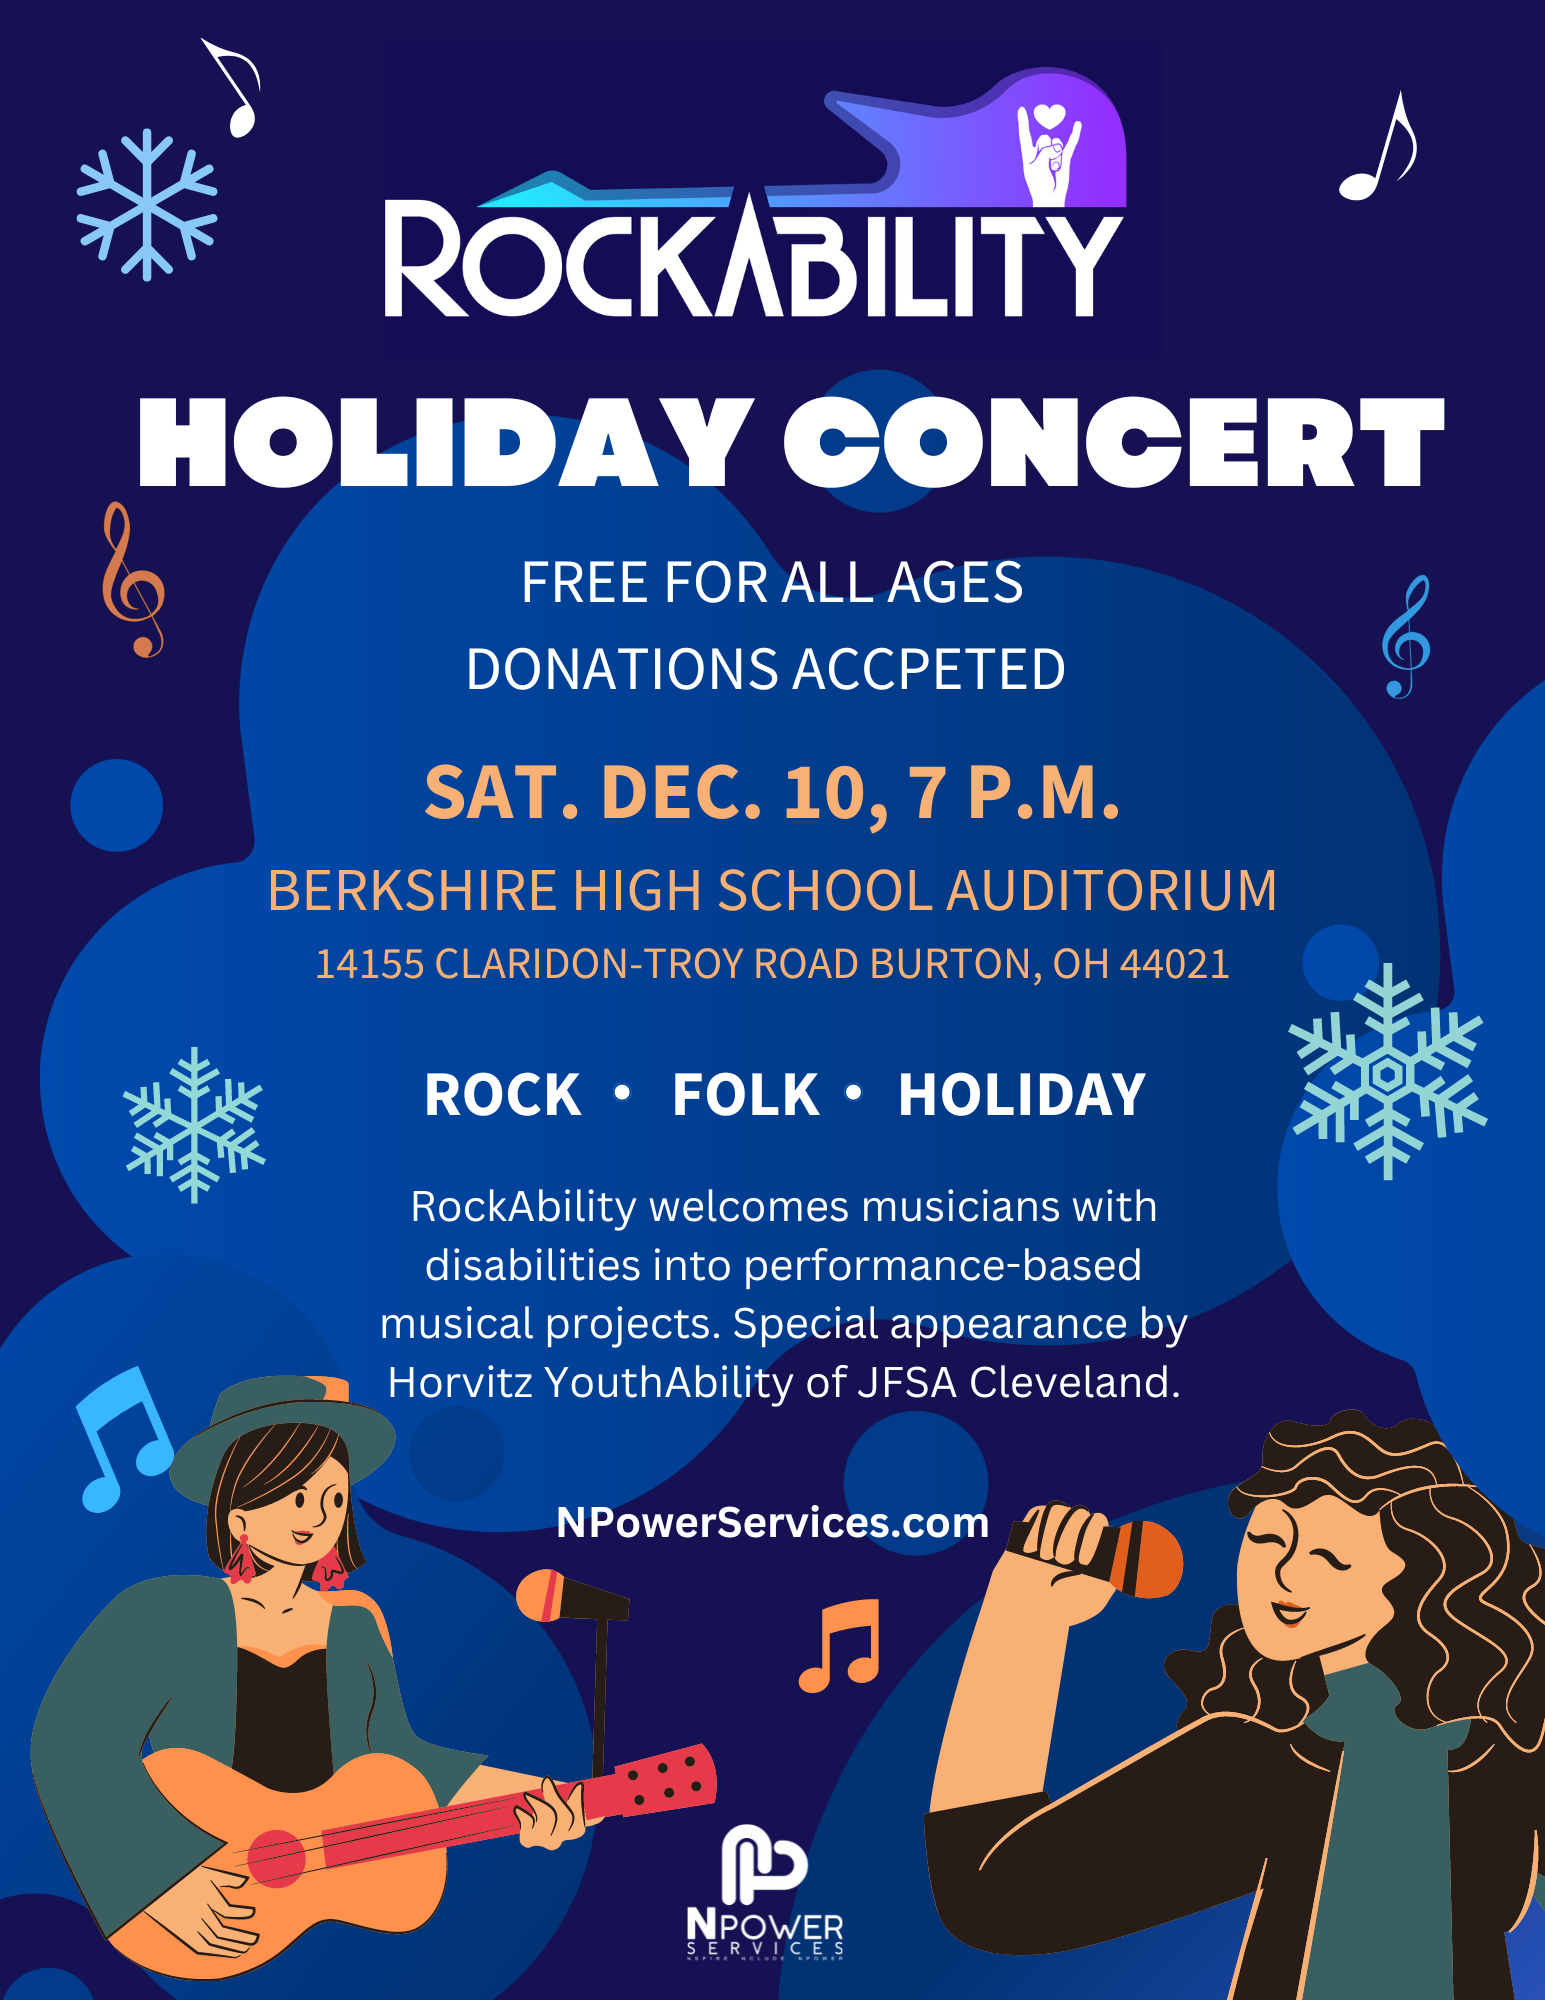 NPower Services presents the first RockAbility Holiday Concert to be held at 7 p.m. , Sat., Dec. 10 at Berkshire High School Auditorium. All Ages. Free; donations accepted.